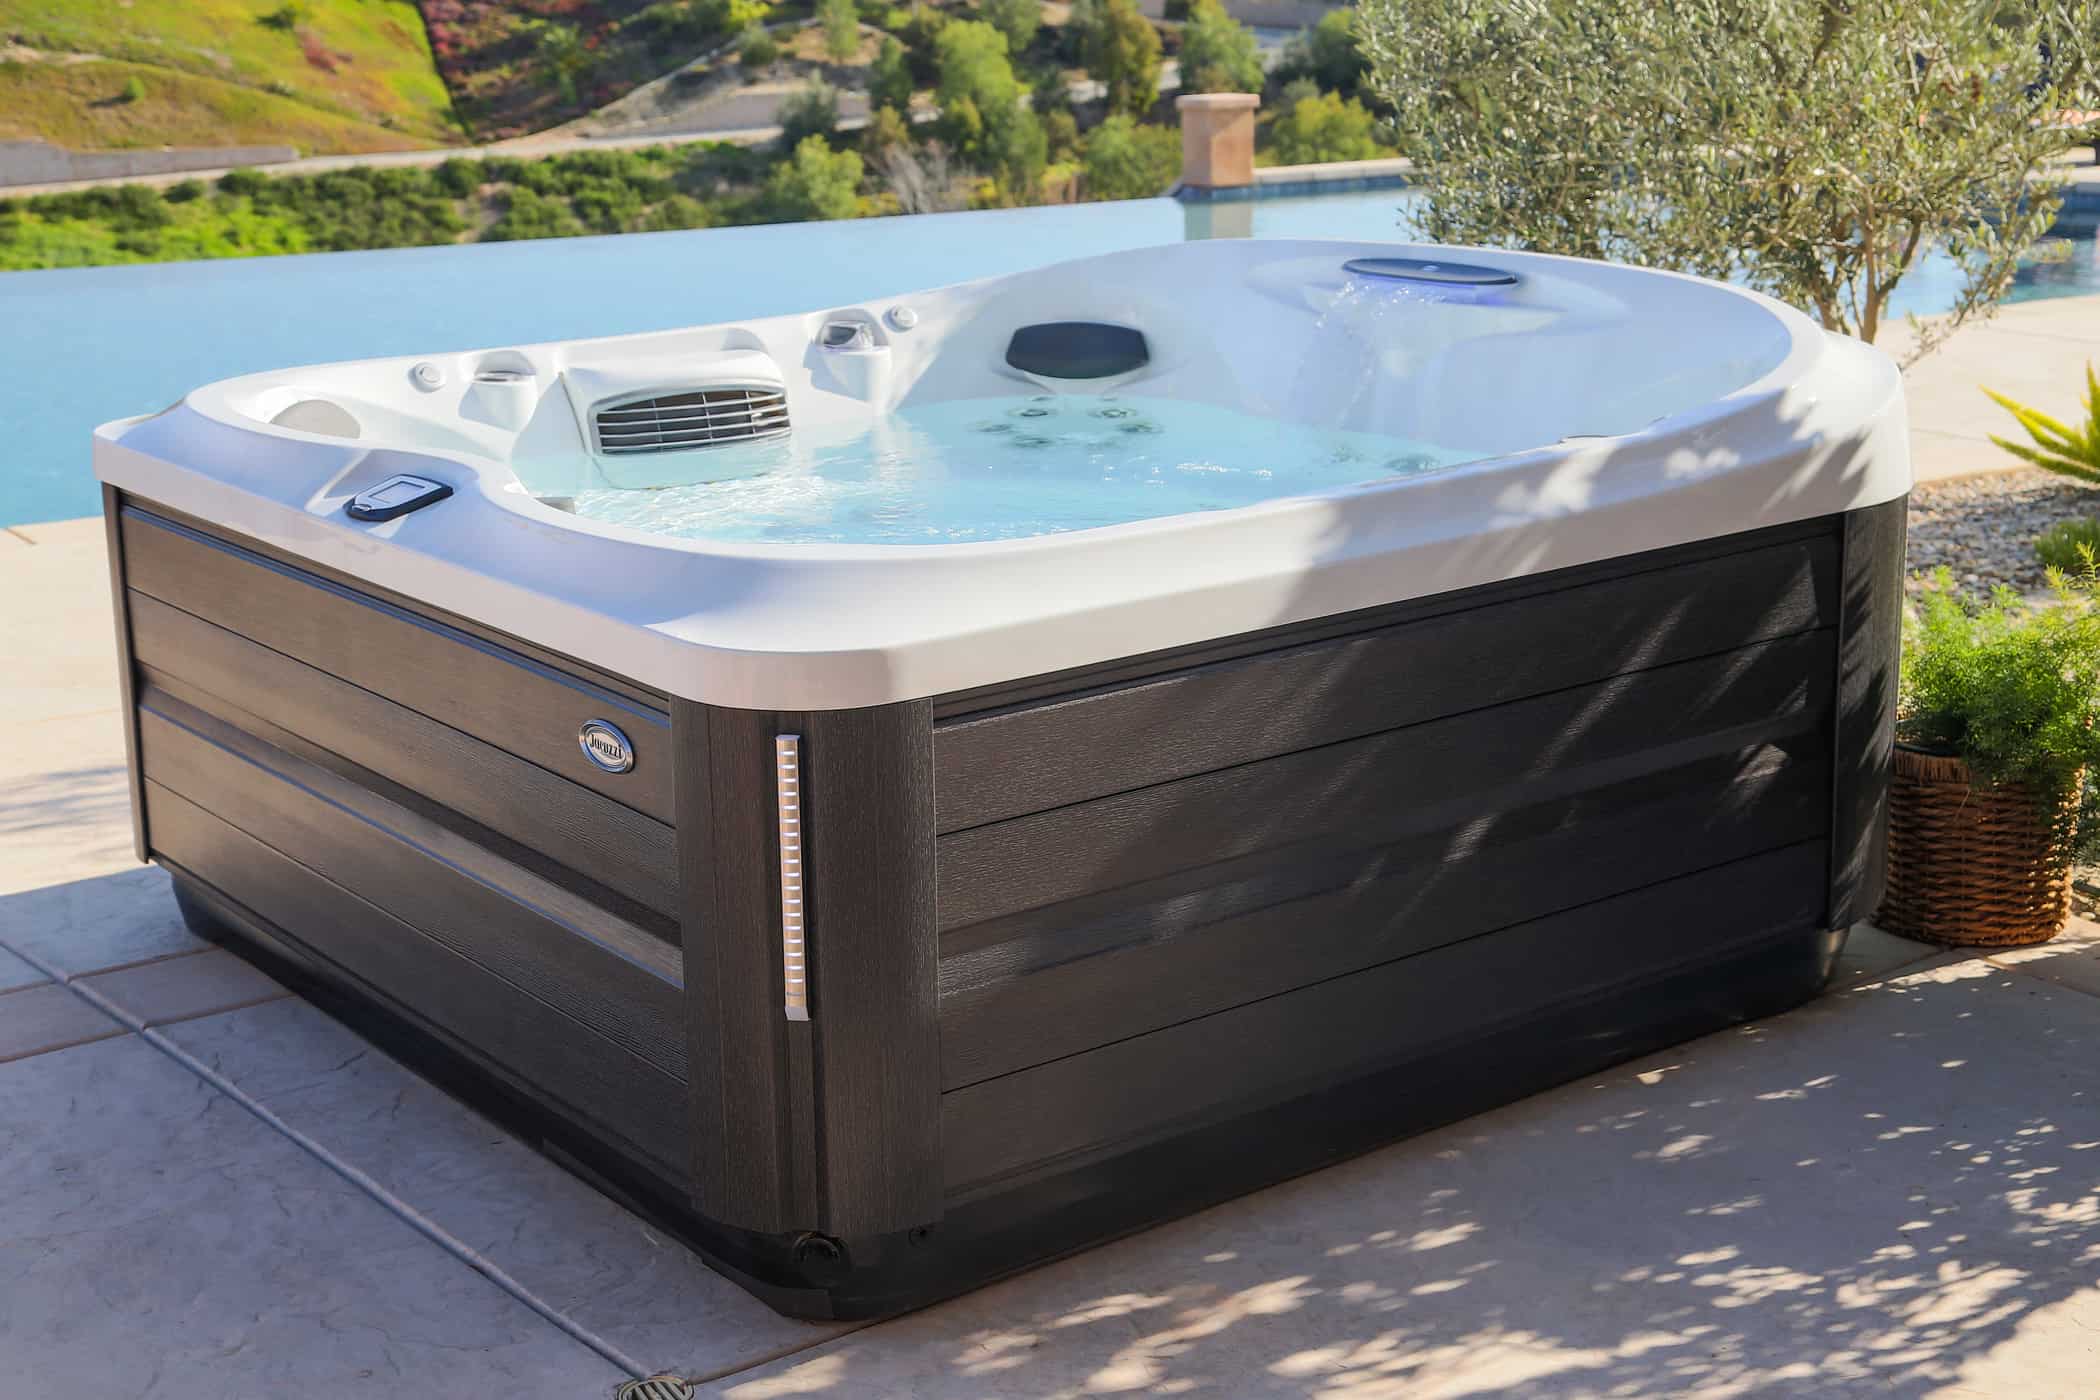 What Is The Most Efficient Hot Tub On The Market?